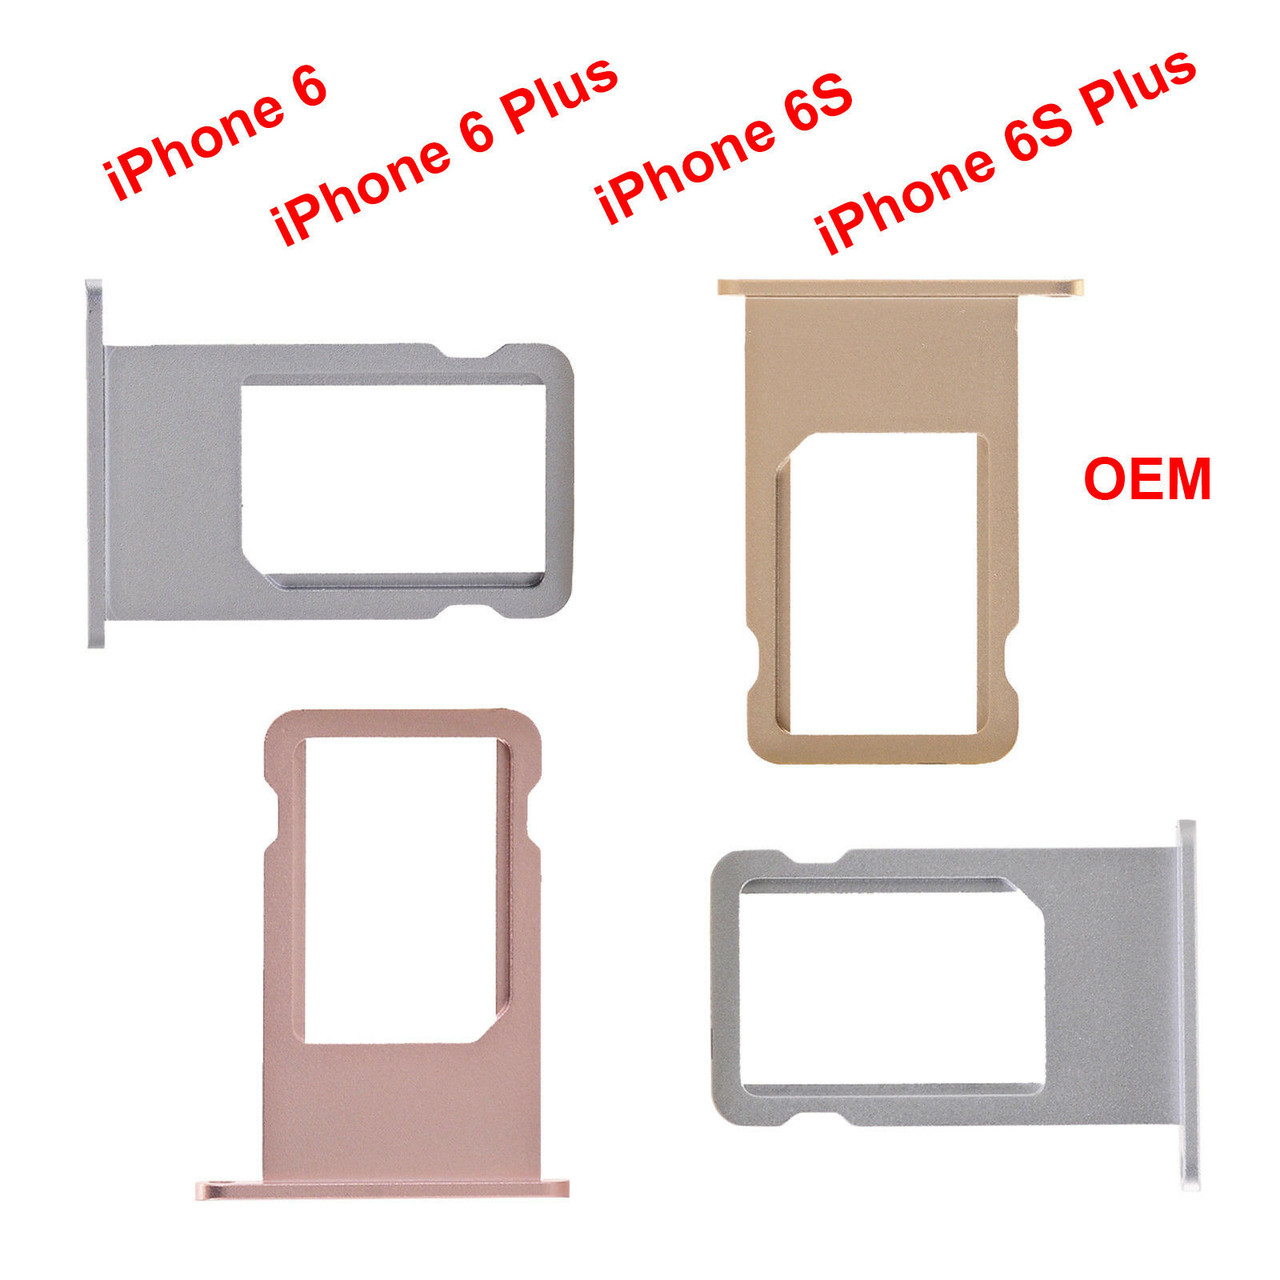 OEM SPEC Sim Card Holder Tray Metal Slot For iPhone 6G 6 Plus iPhone 6S 6S Plus